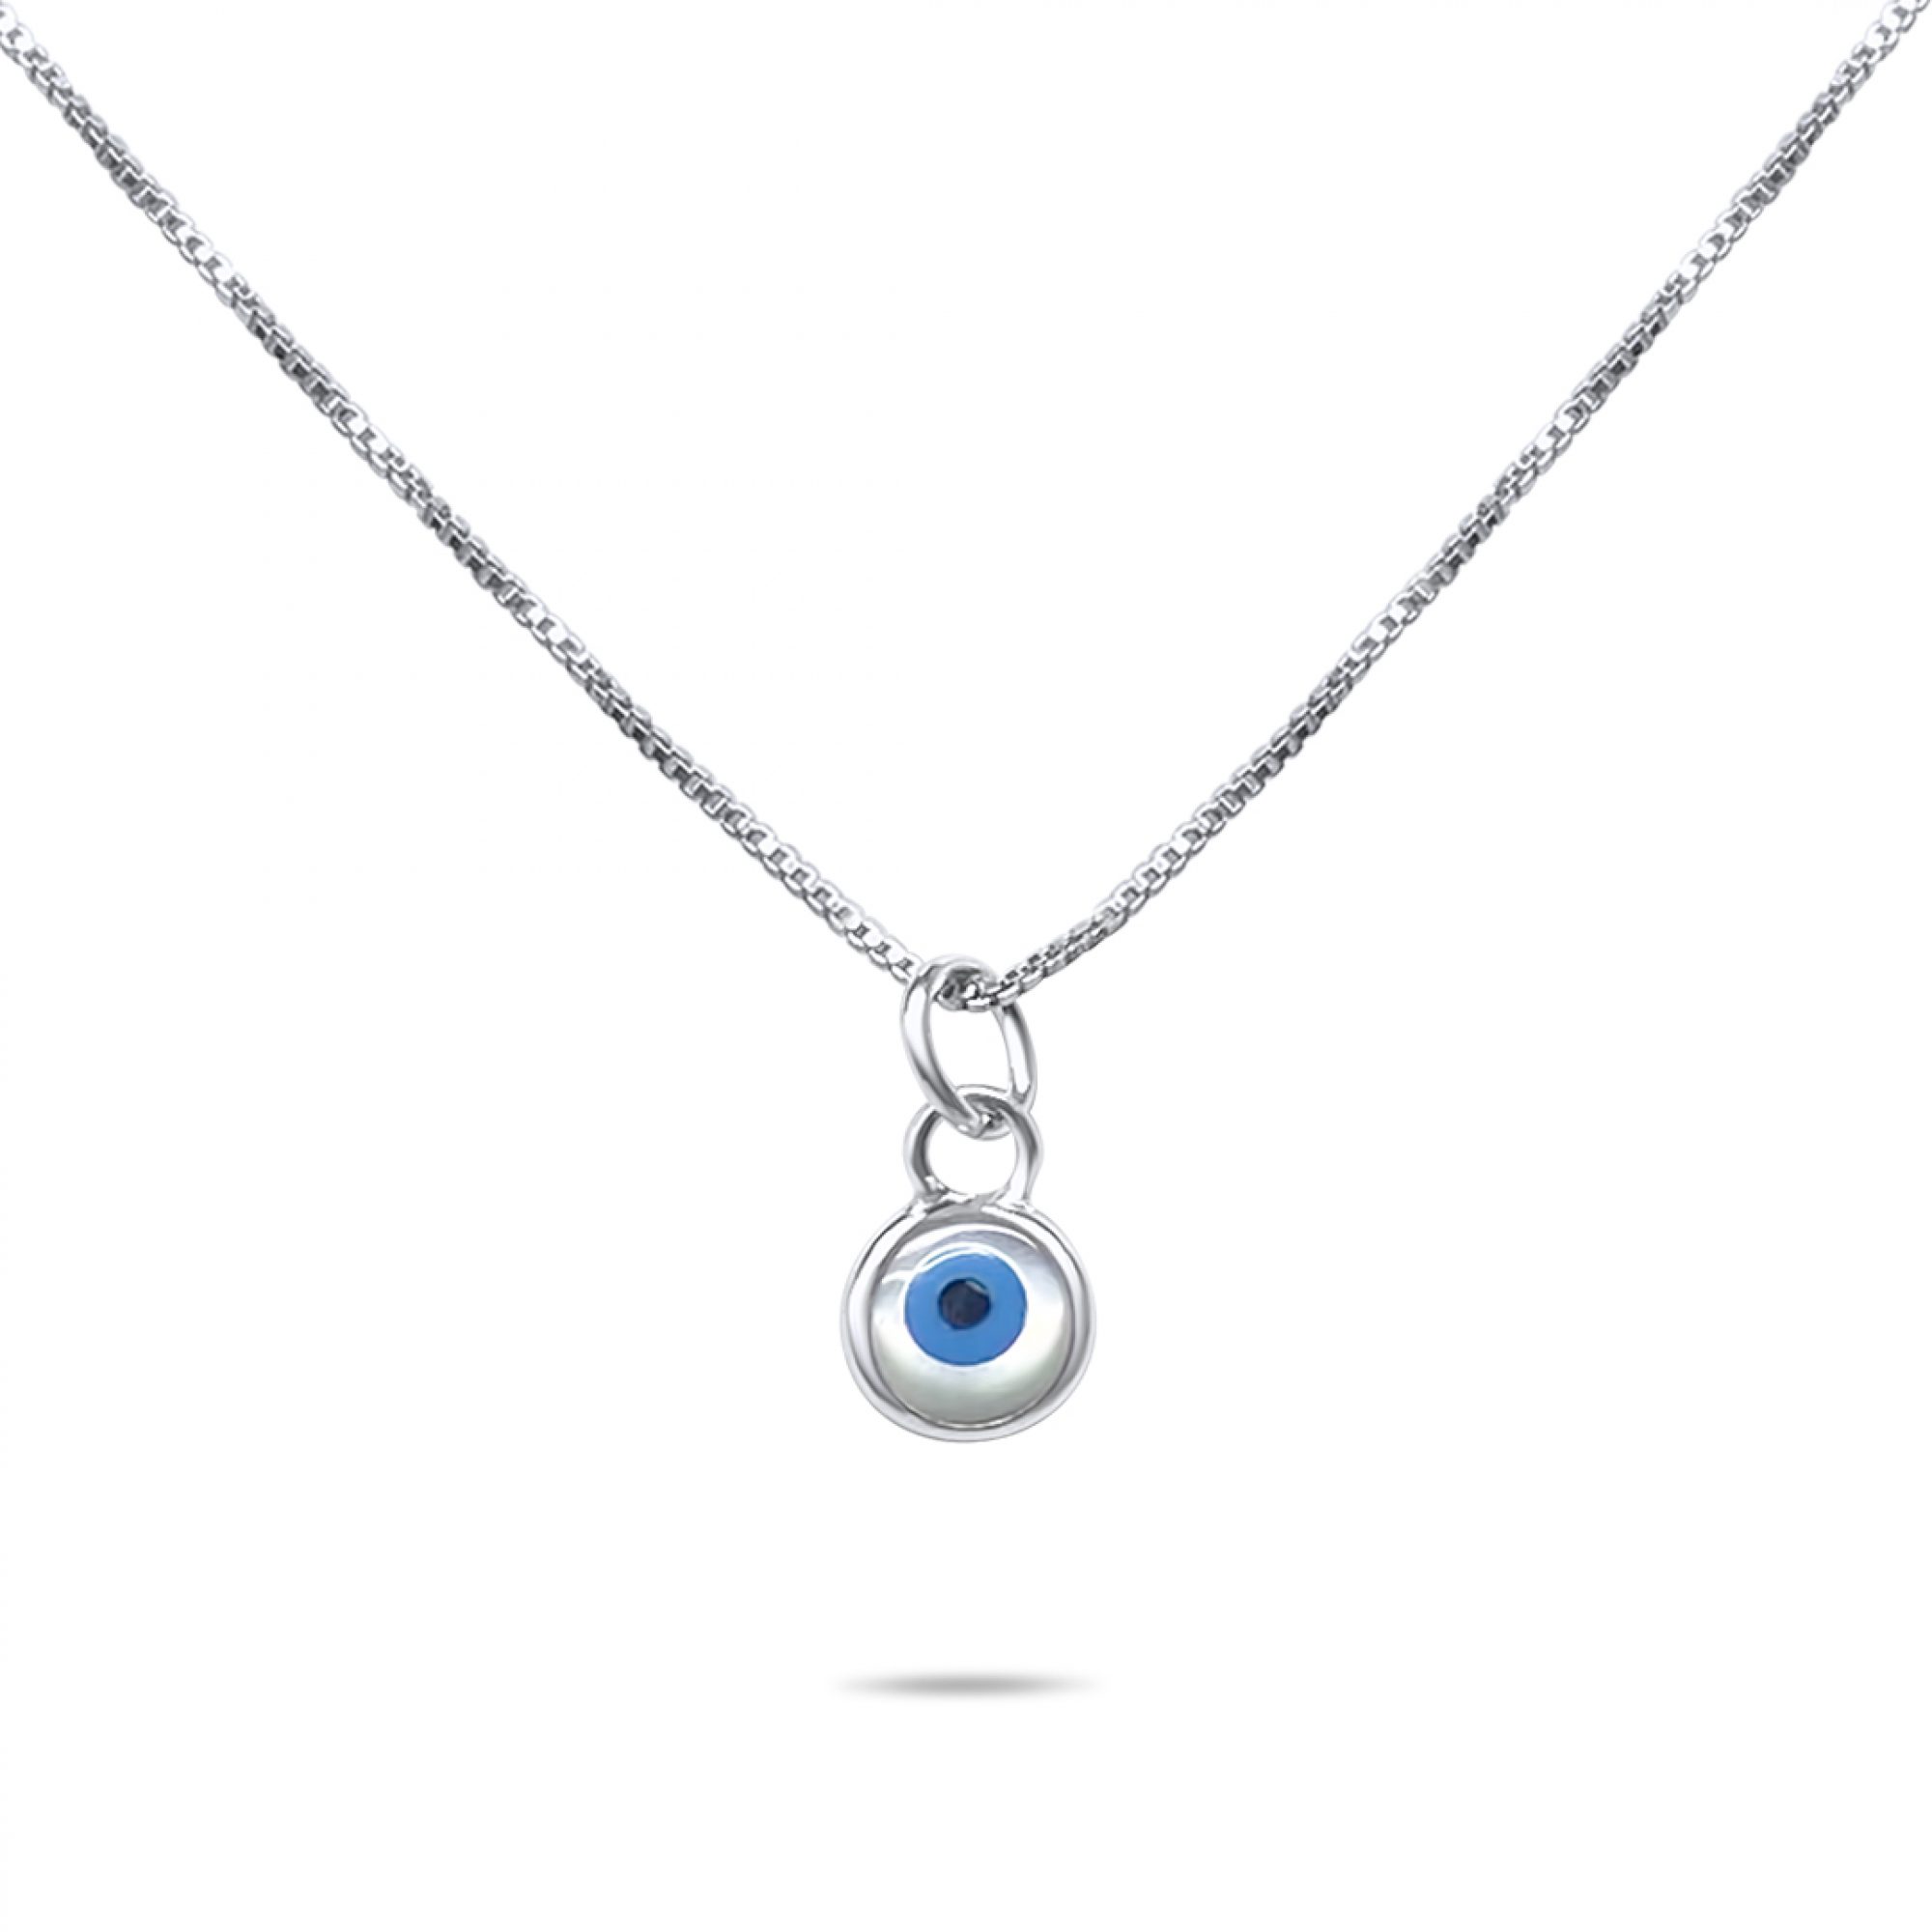 Eye pendant necklace with mother of pearl